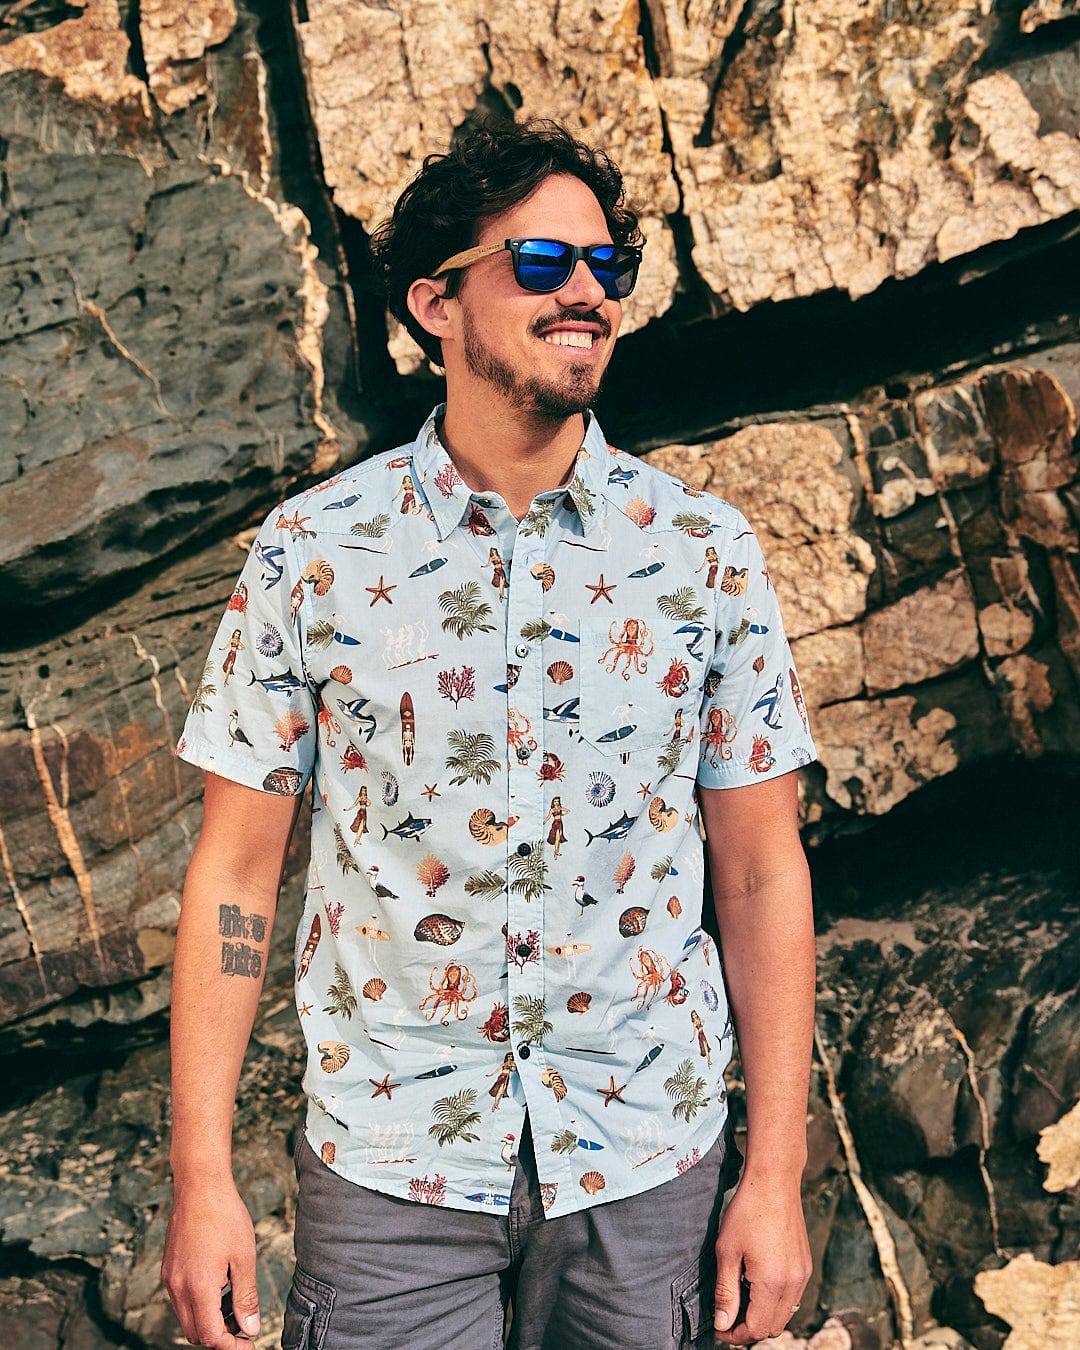 A man wearing sunglasses and a Ruan - Mens Washed Short Sleeve Shirt from Saltrock with birds on it.